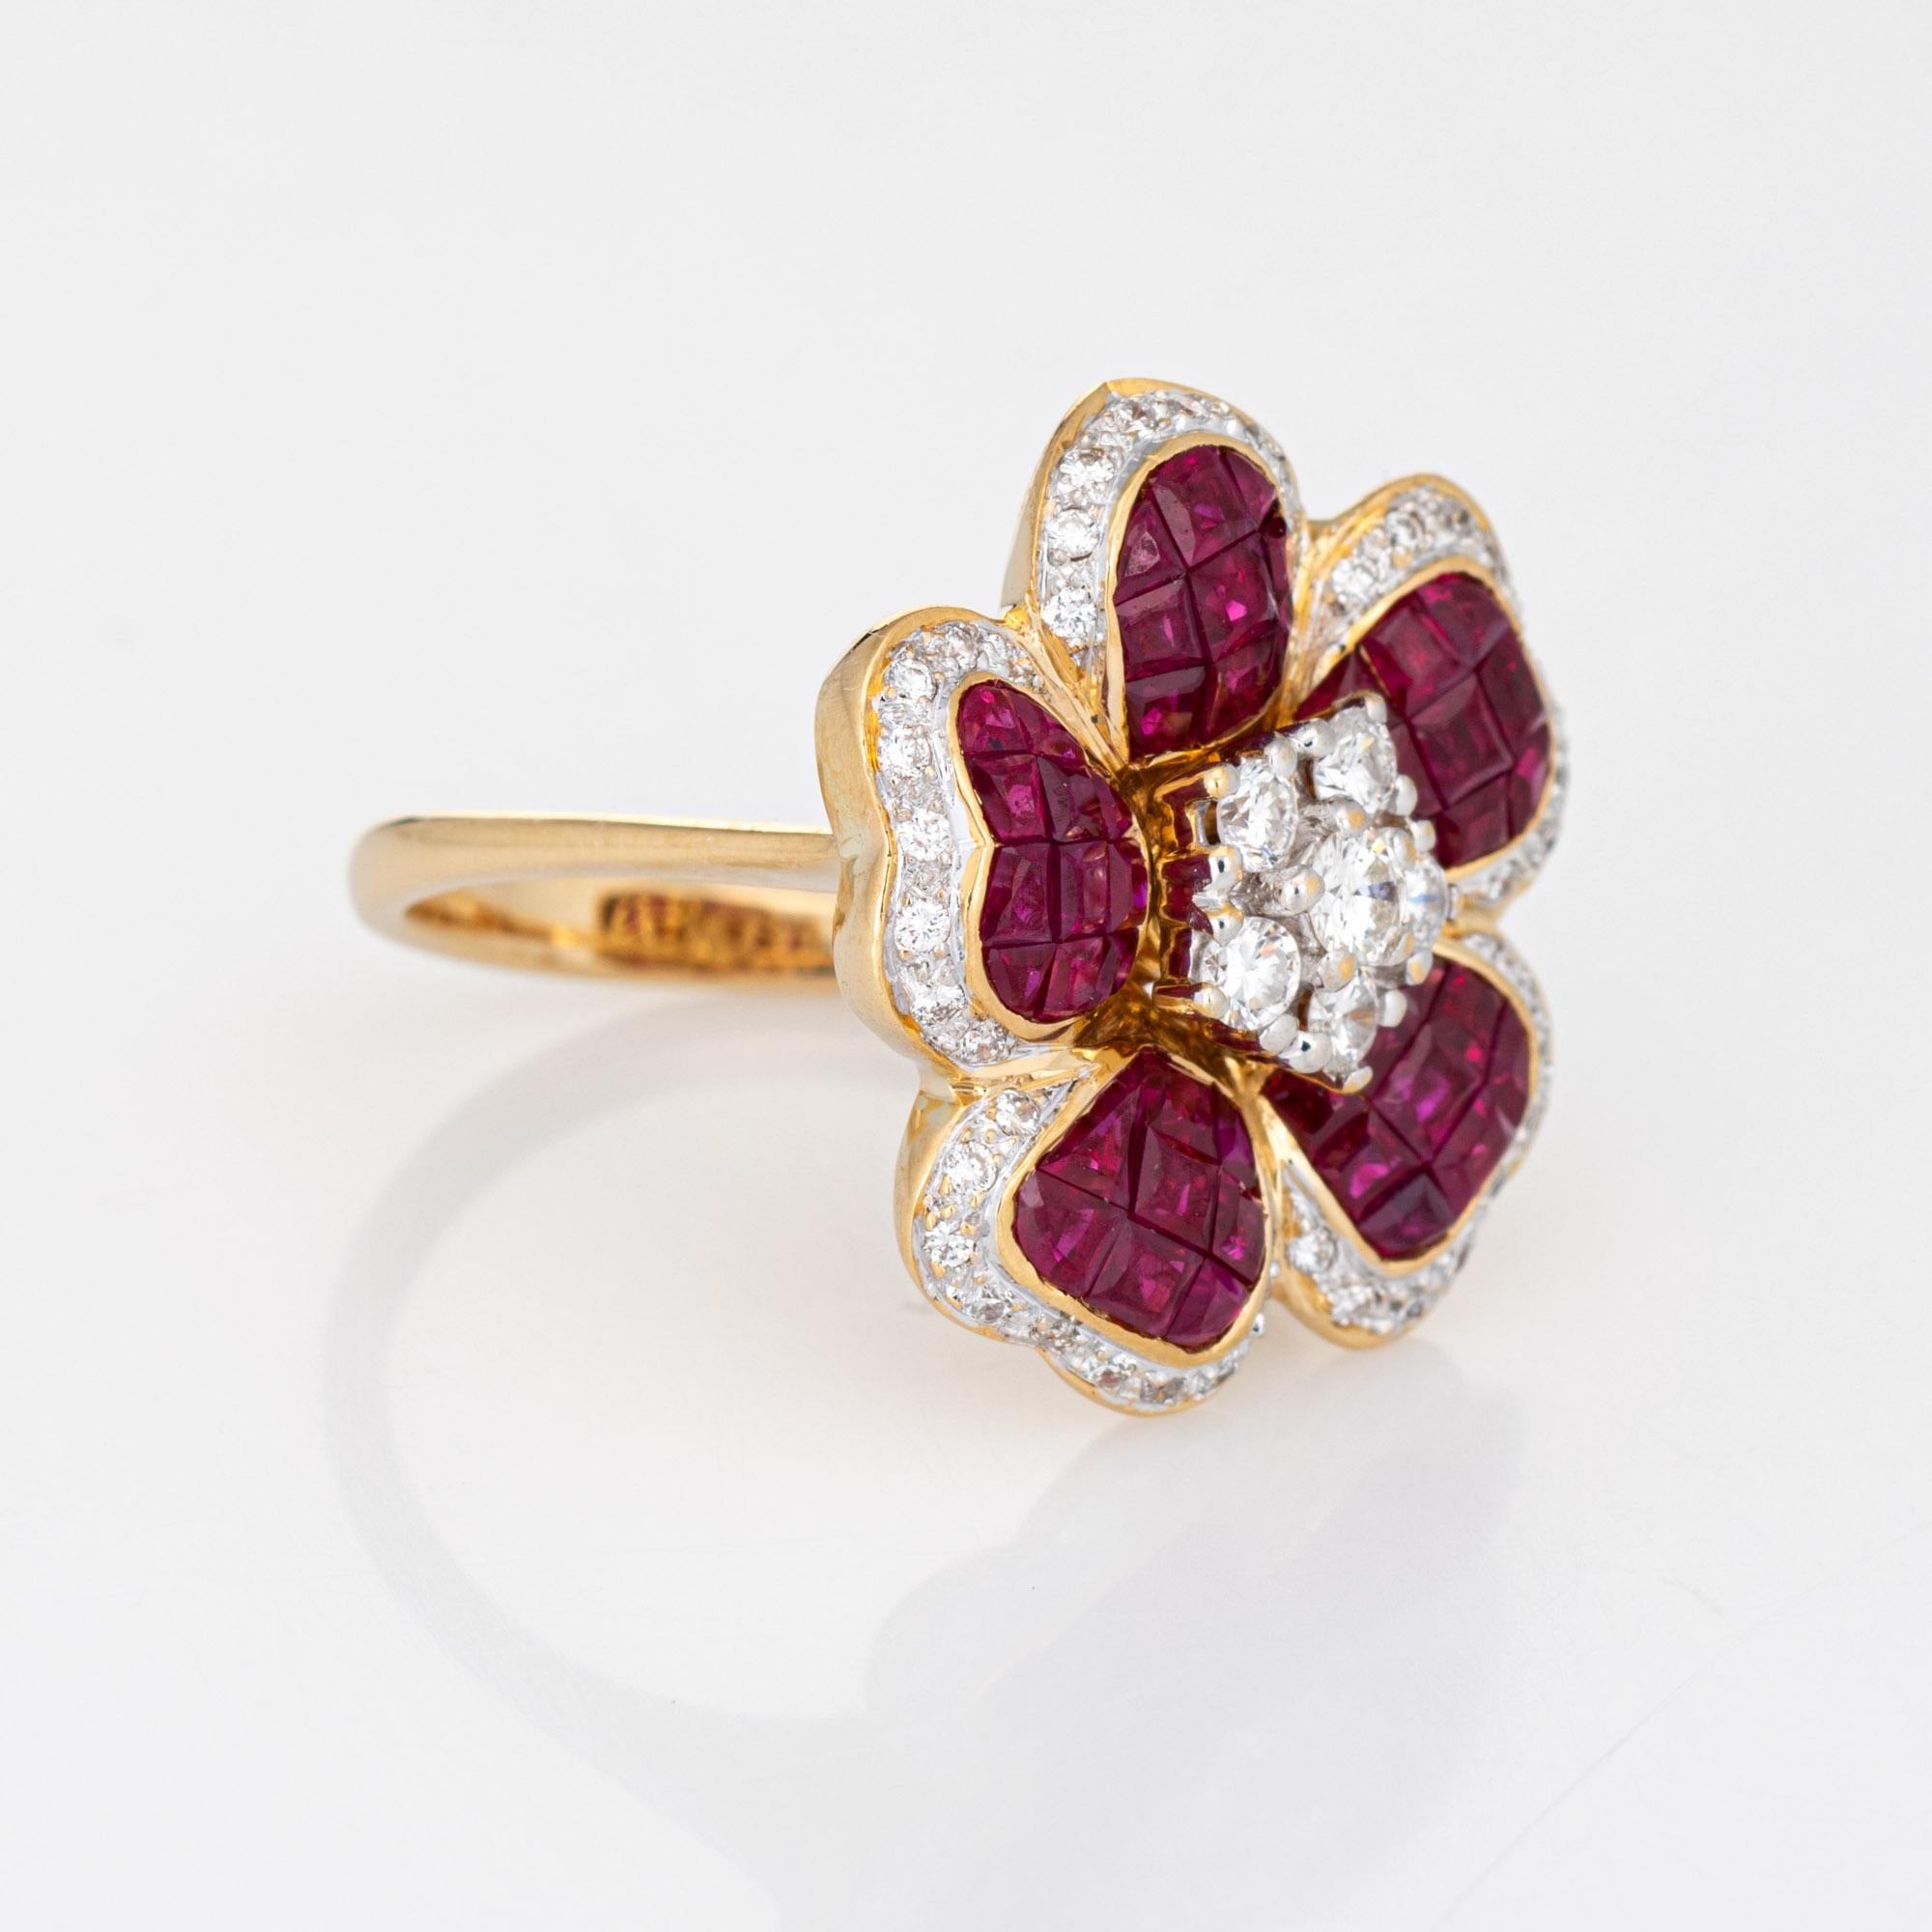 Modern Invisible Set Ruby Diamond Flower Ring Vintage 18k Yellow Gold Cocktail Jewelry